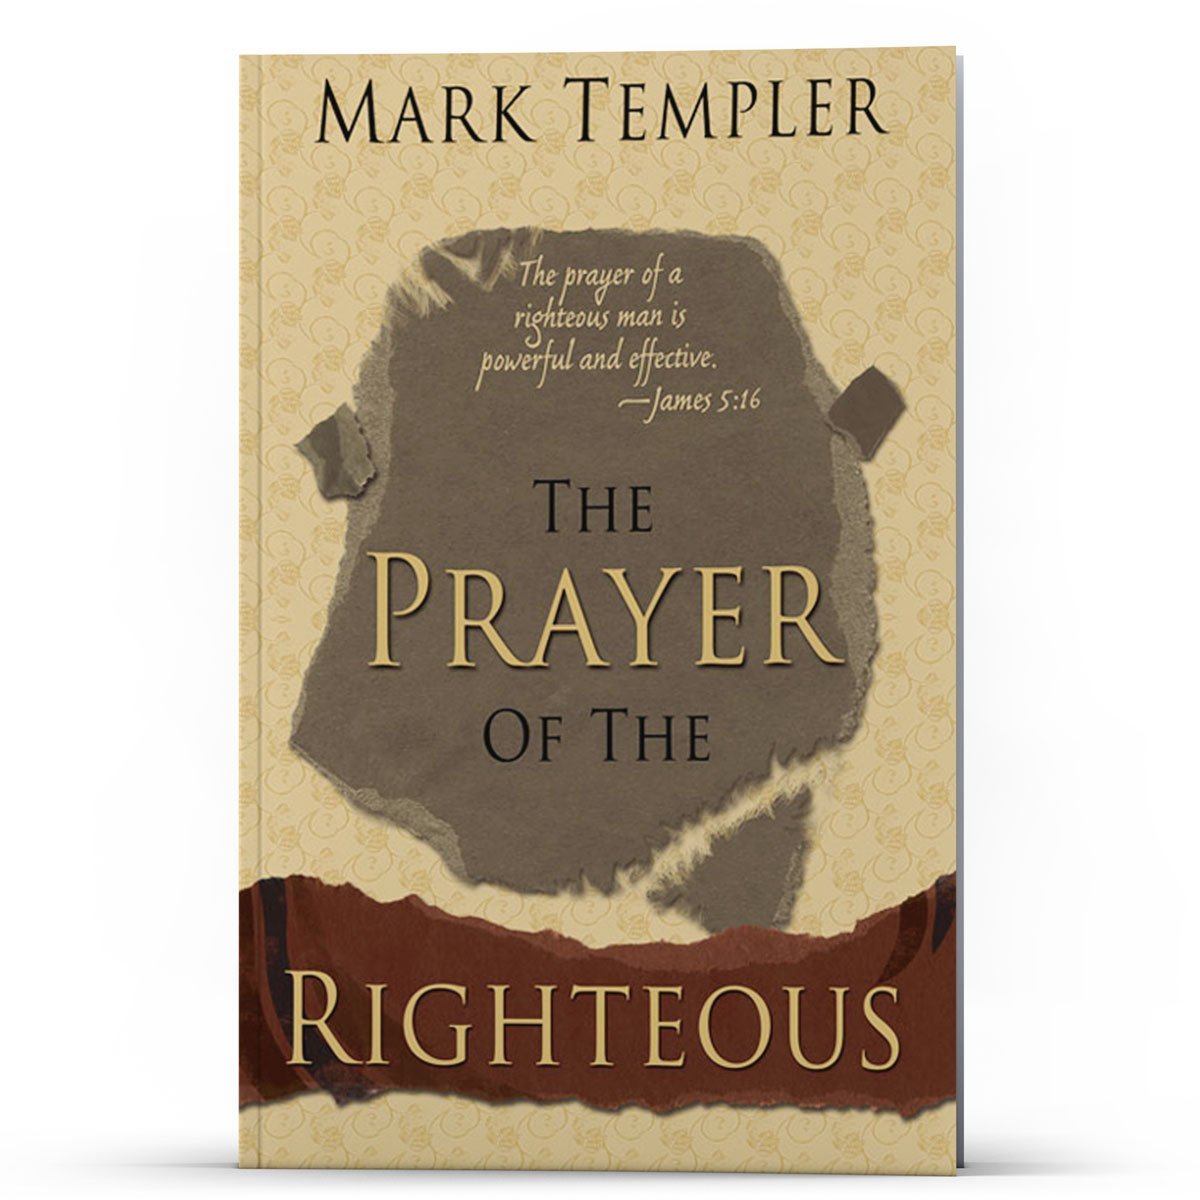 The Prayer of the Righteous - Illumination Publishers